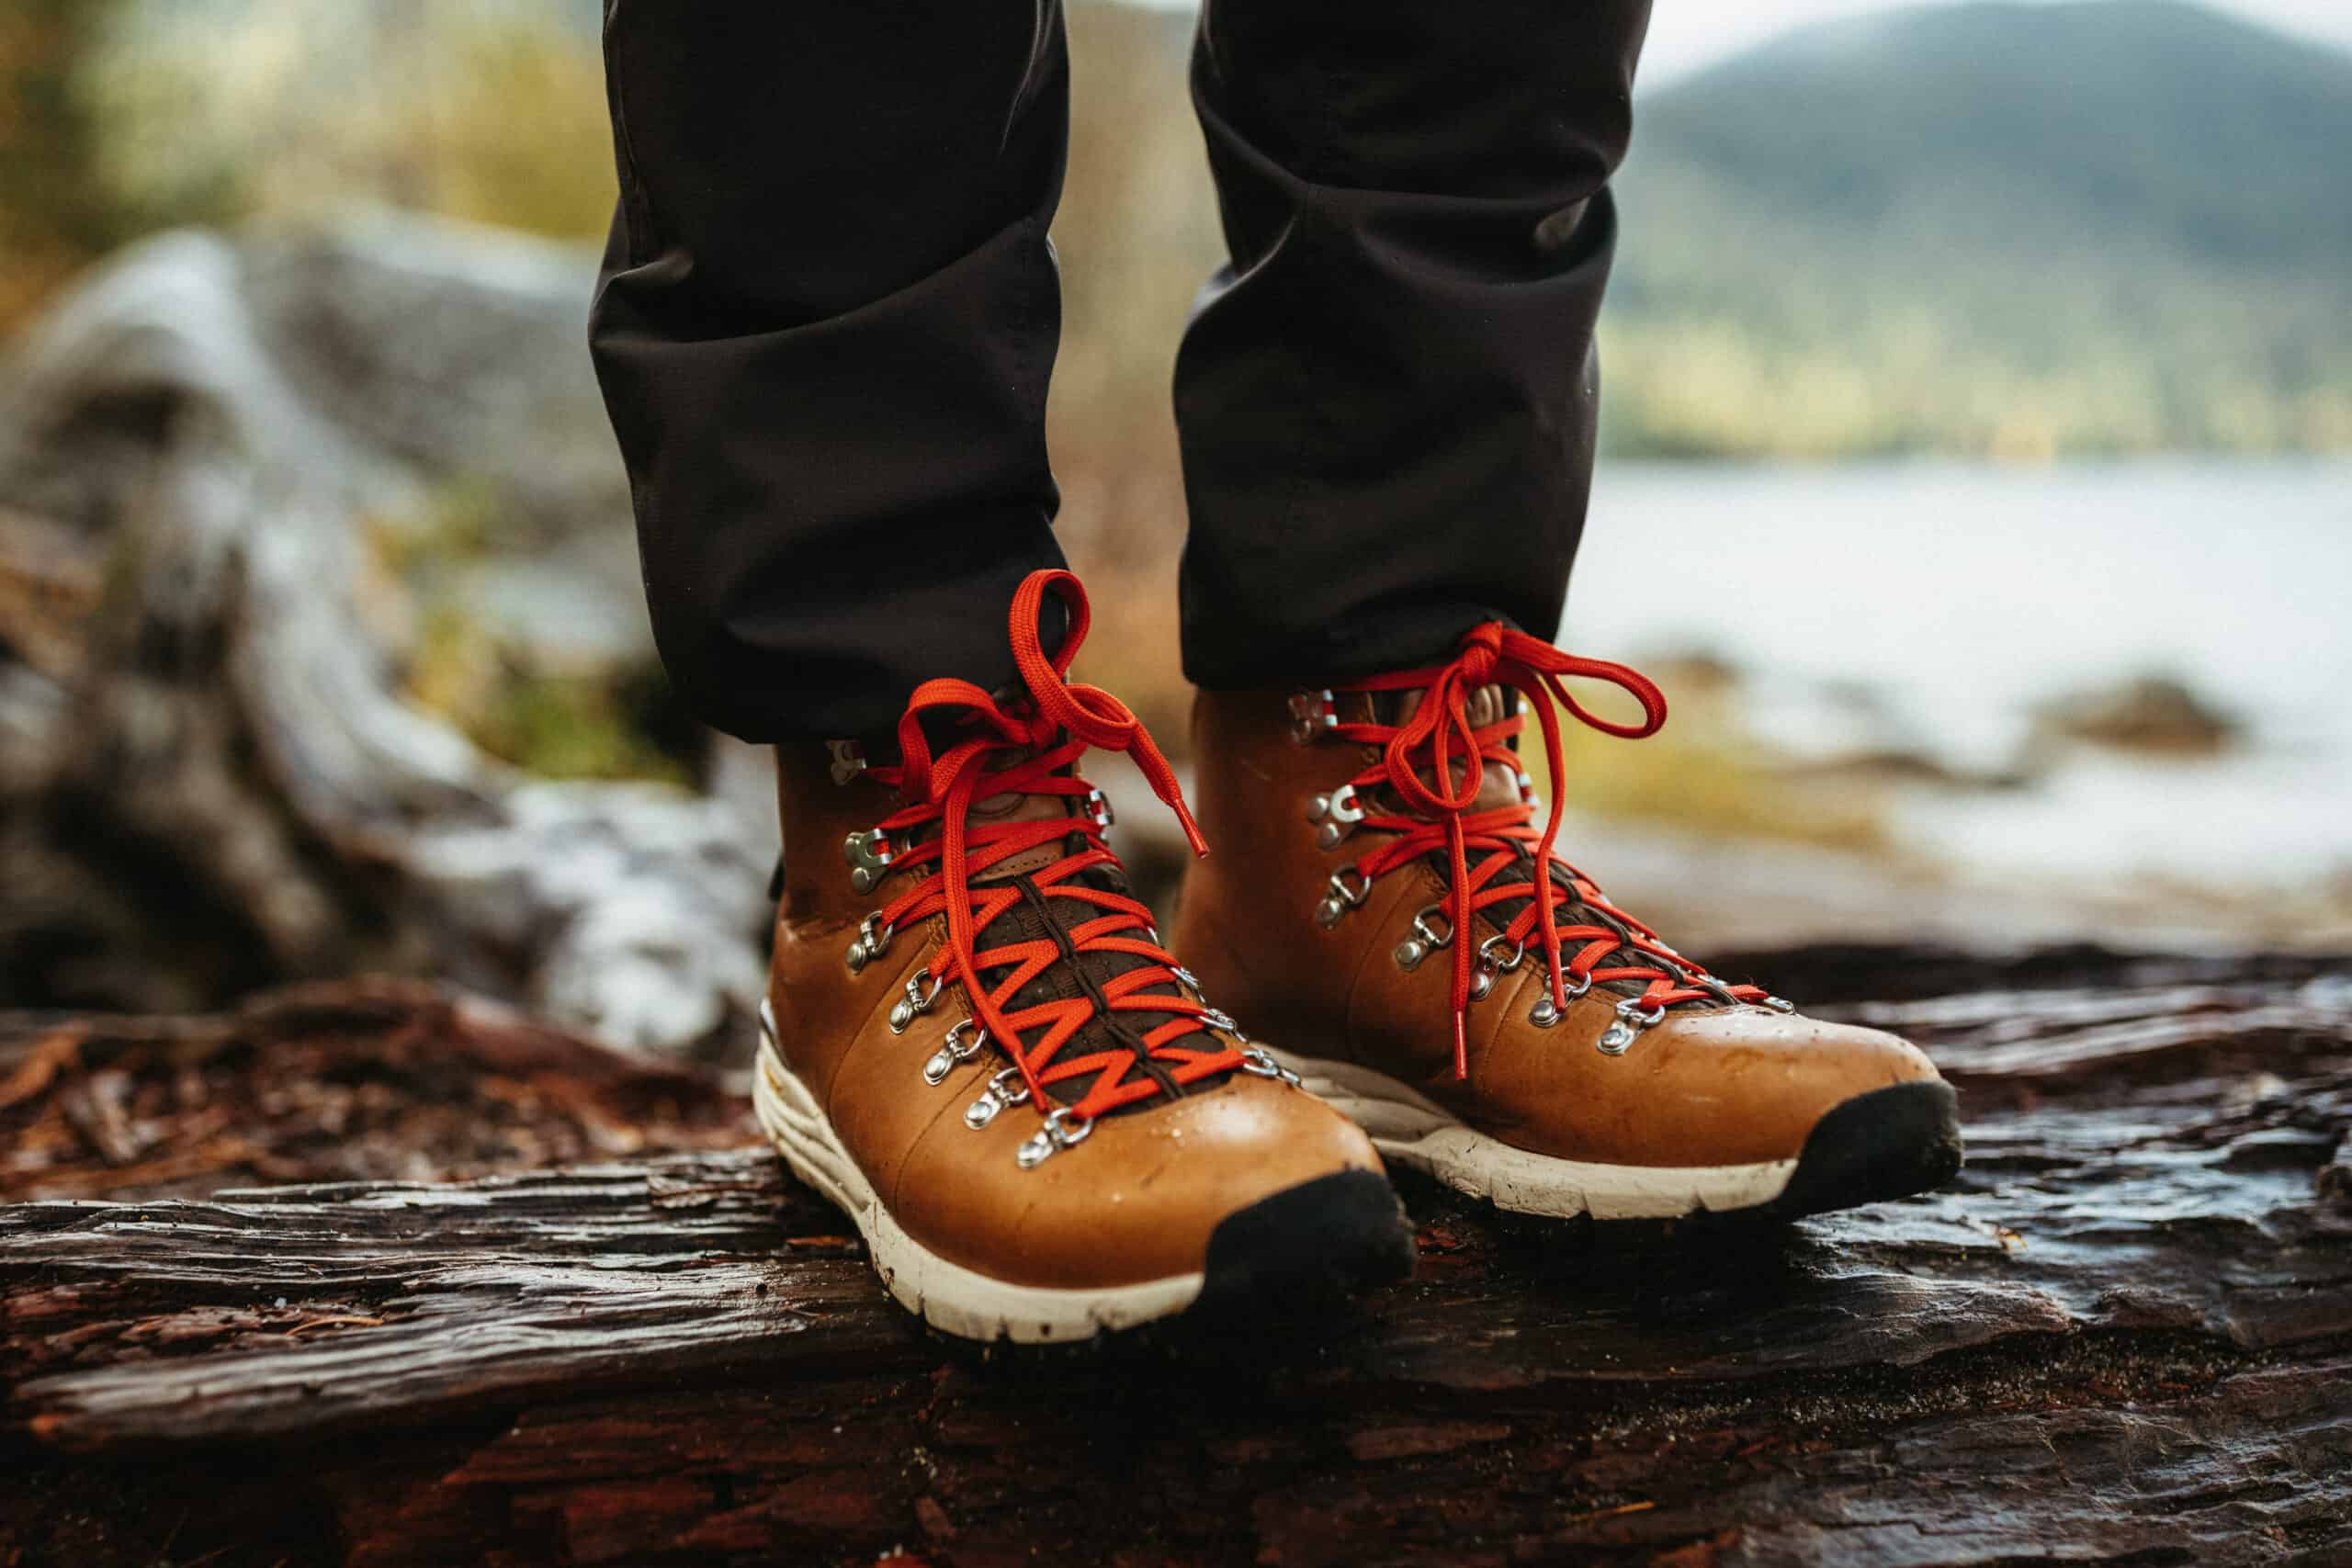 The 12 Best Hiking Boots For Pacific Northwest Trails (According To Our Readers!)